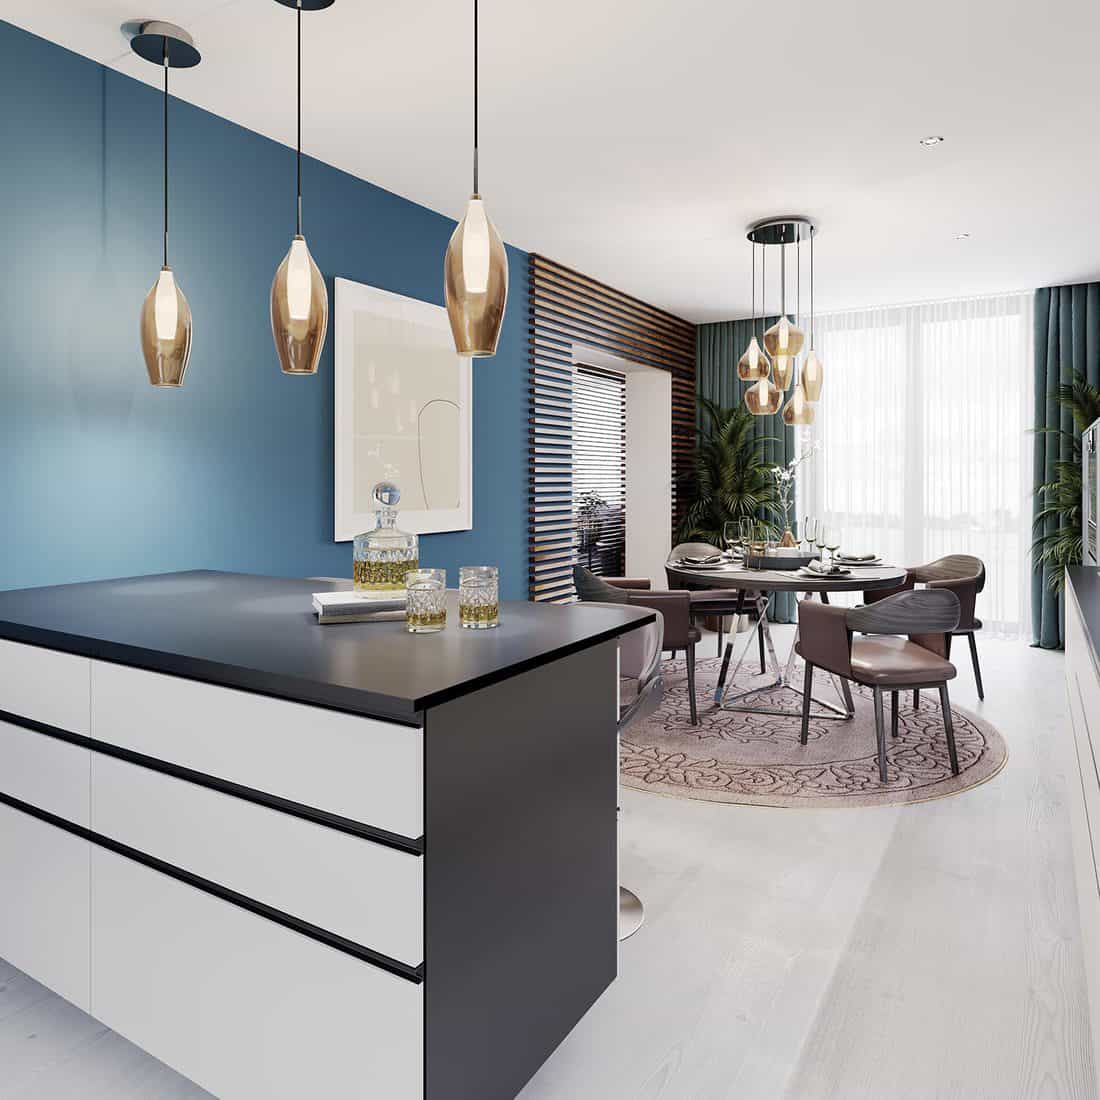 Luxurious multi-colored kitchen with dining tables in a new modern style